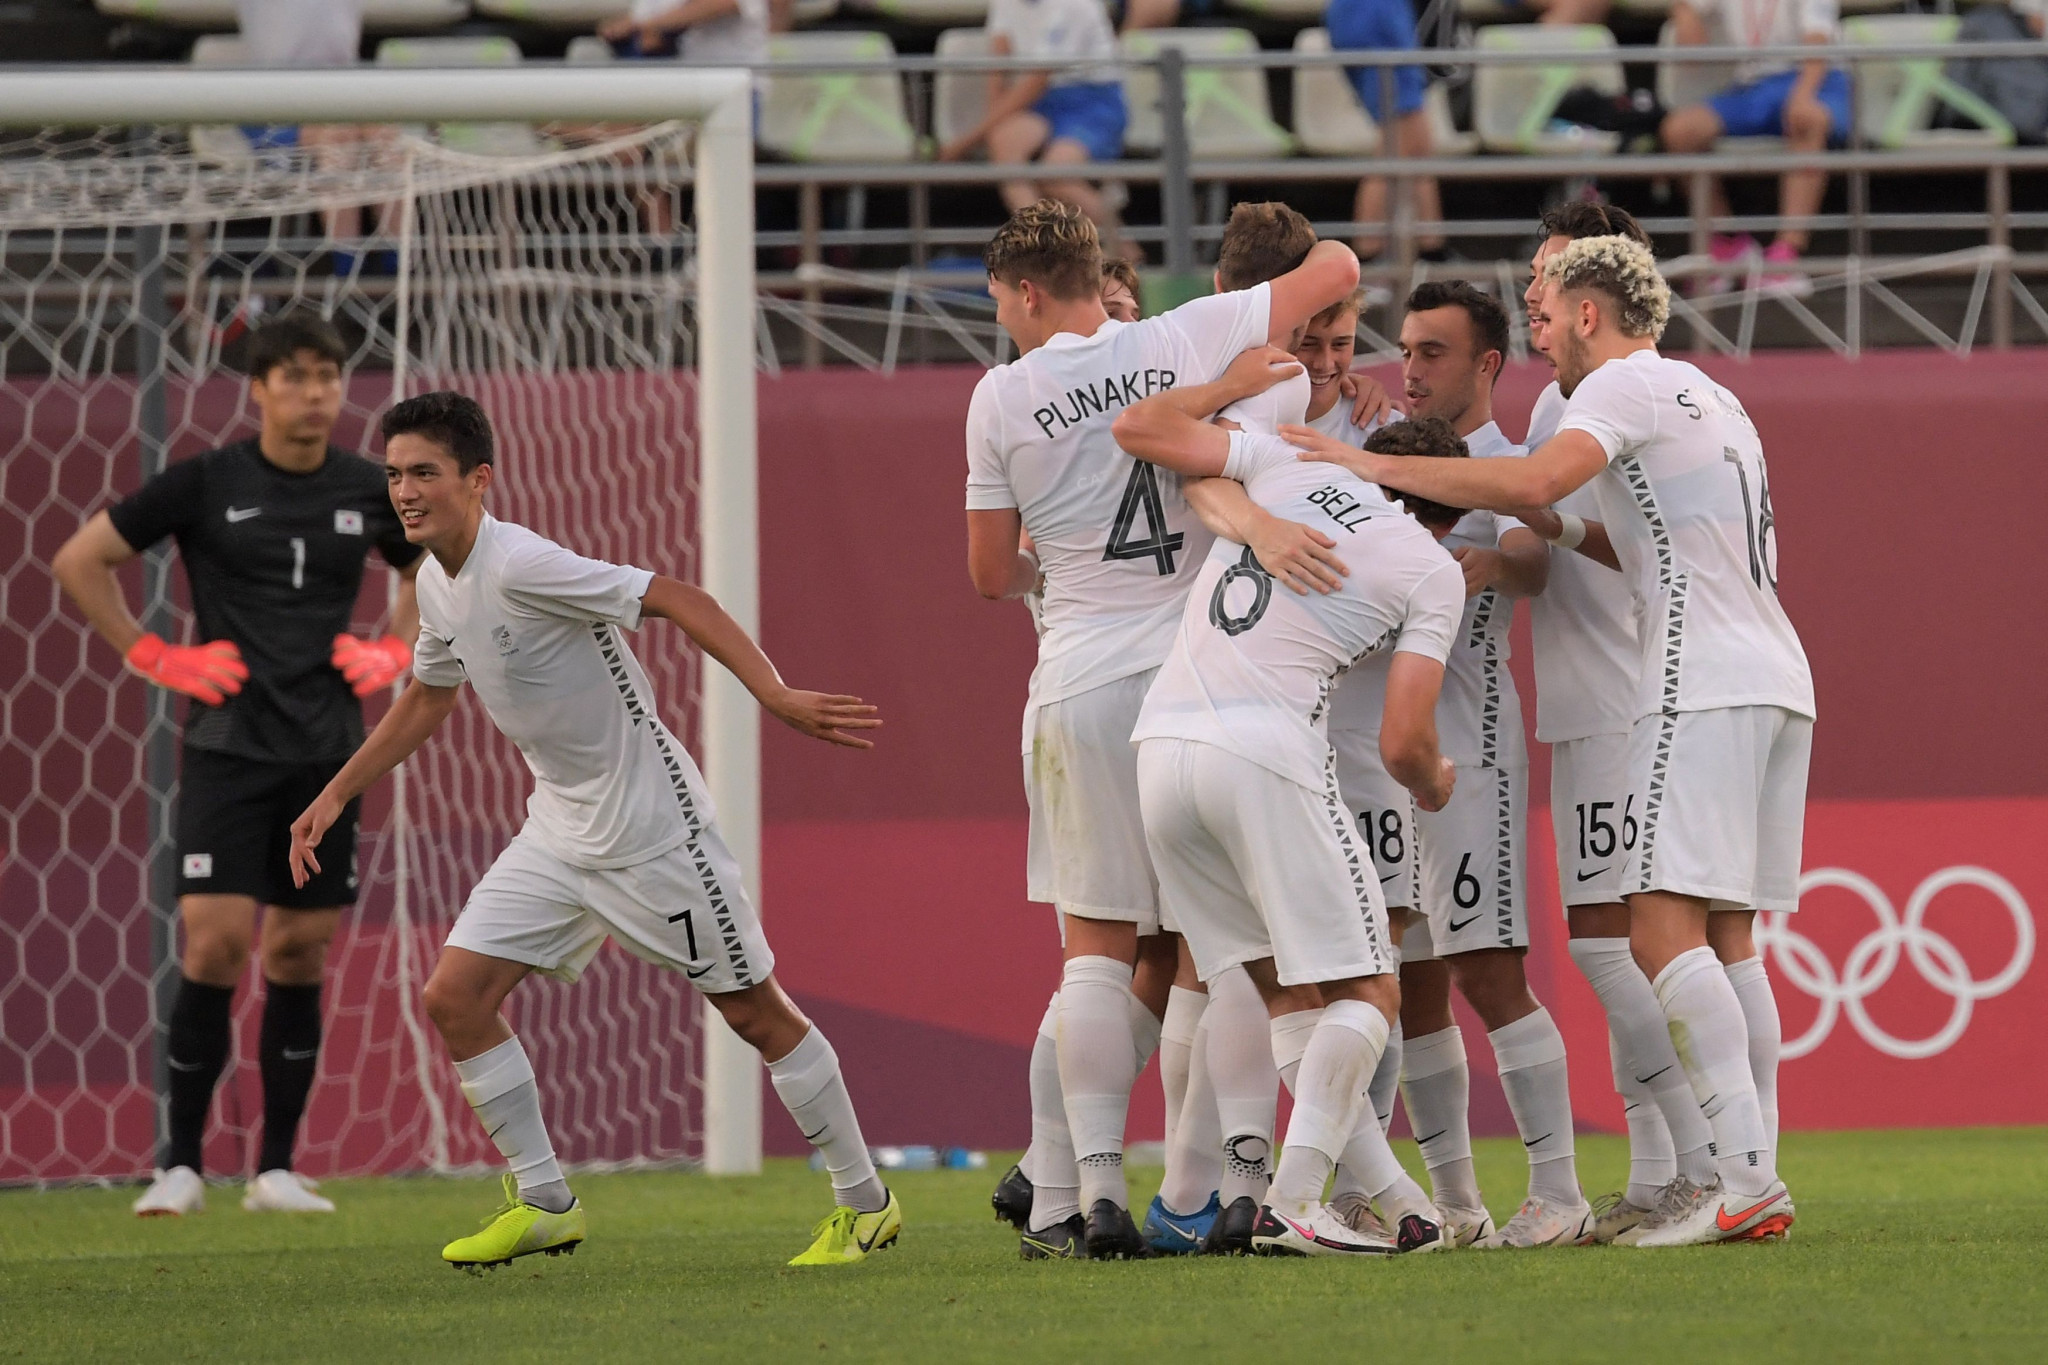 New Zealand progressed to the men's football quarter-finals at the Olympics for the first time at Tokyo 2020 ©Getty Images